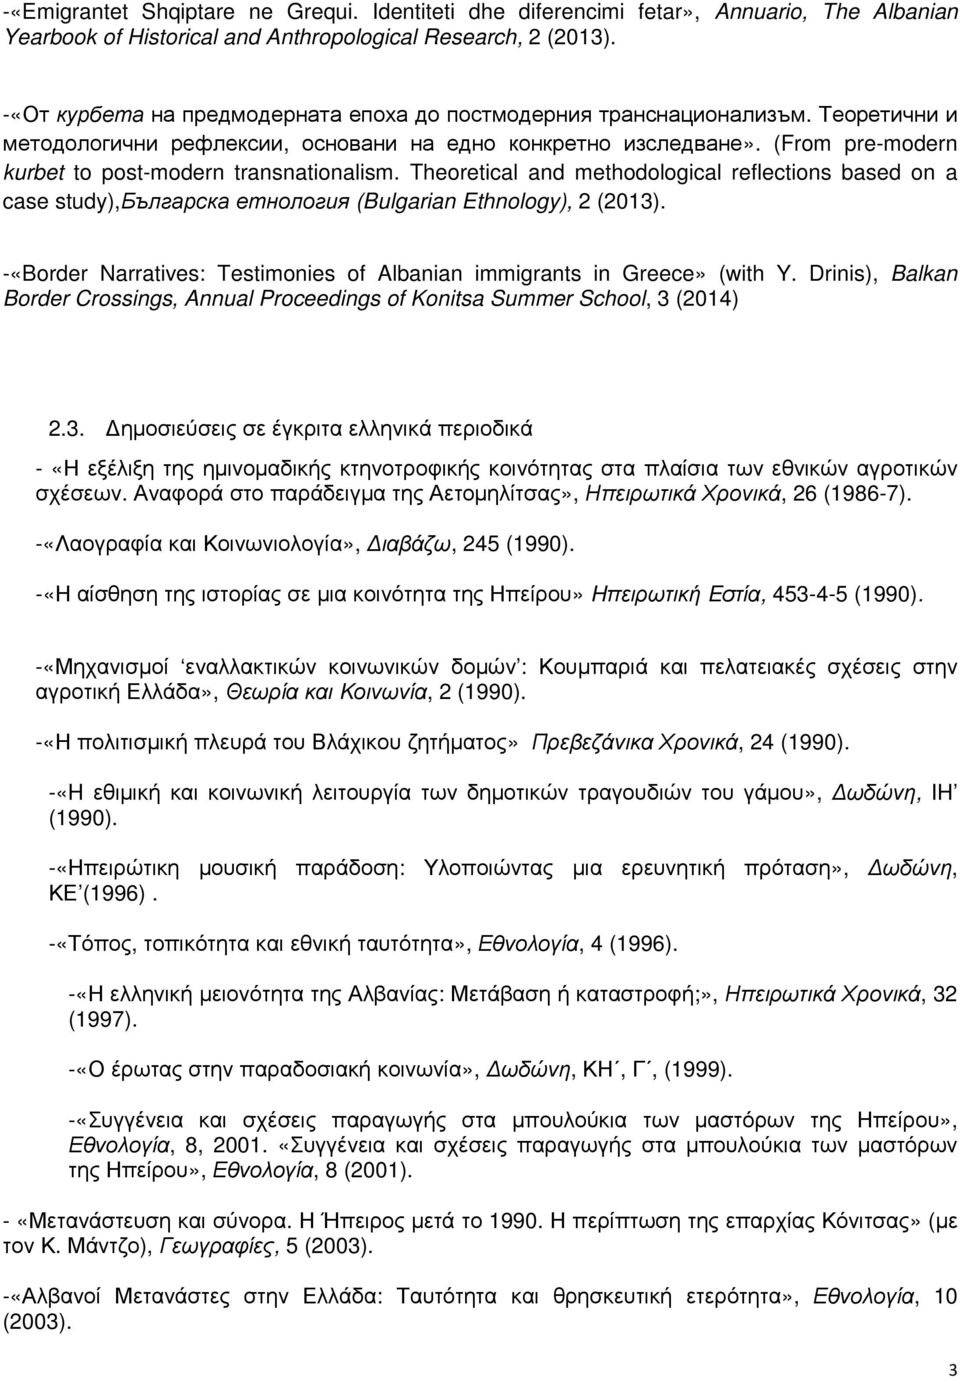 (From pre-modern kurbet to post-modern transnationalism. Theoretical and methodological reflections based on a case study),българска етнология (Bulgarian Ethnology), 2 (2013).